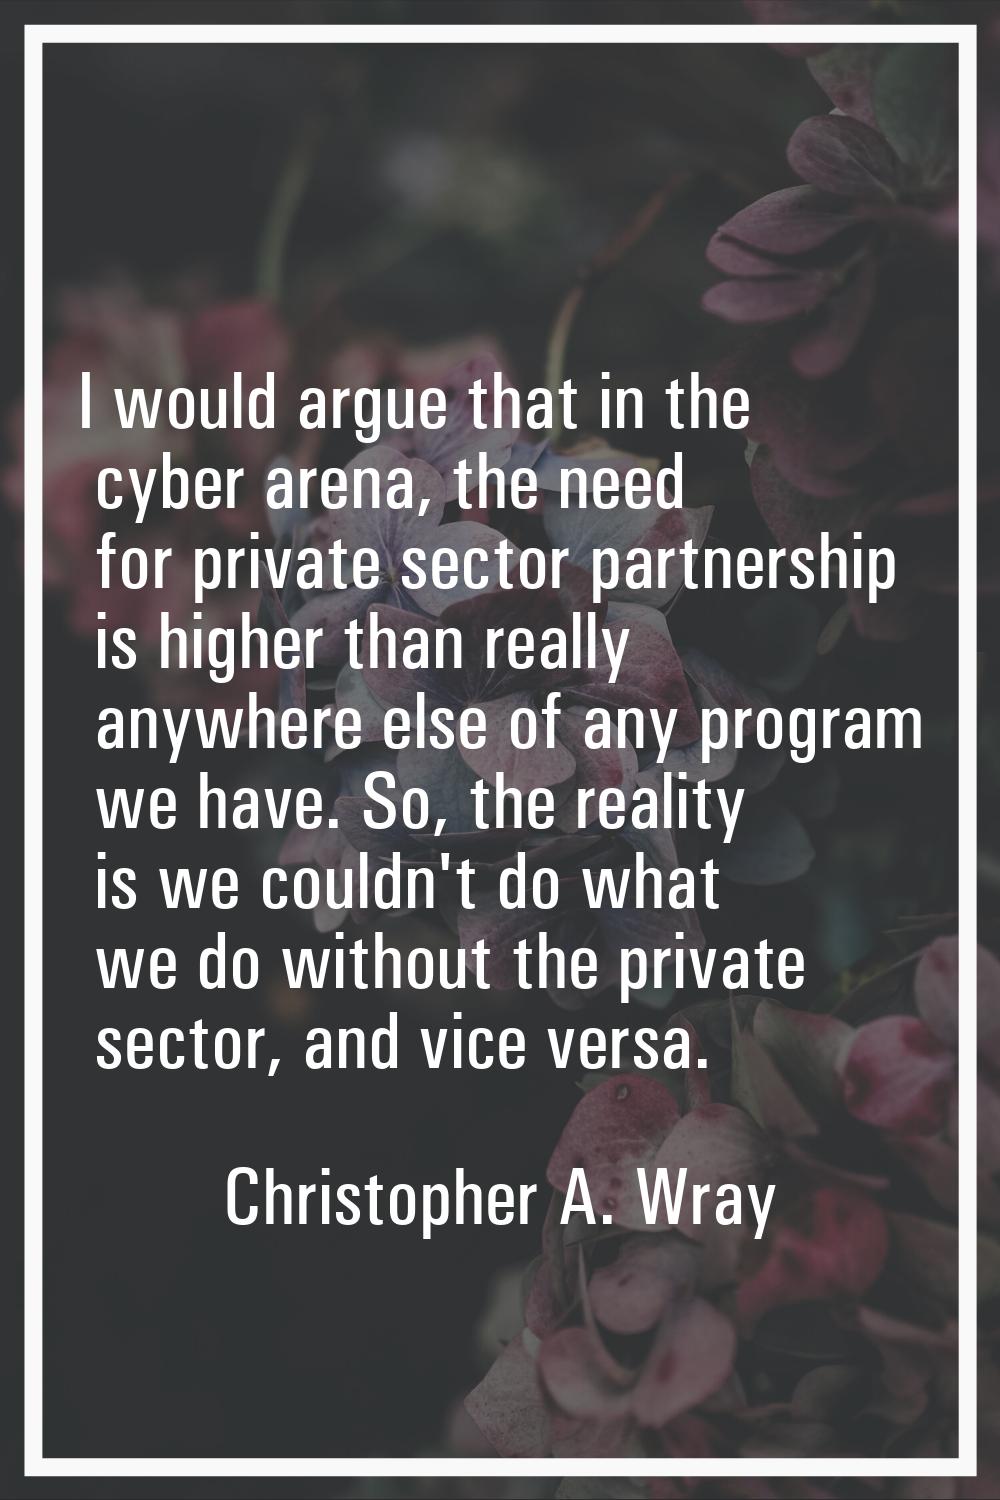 I would argue that in the cyber arena, the need for private sector partnership is higher than reall